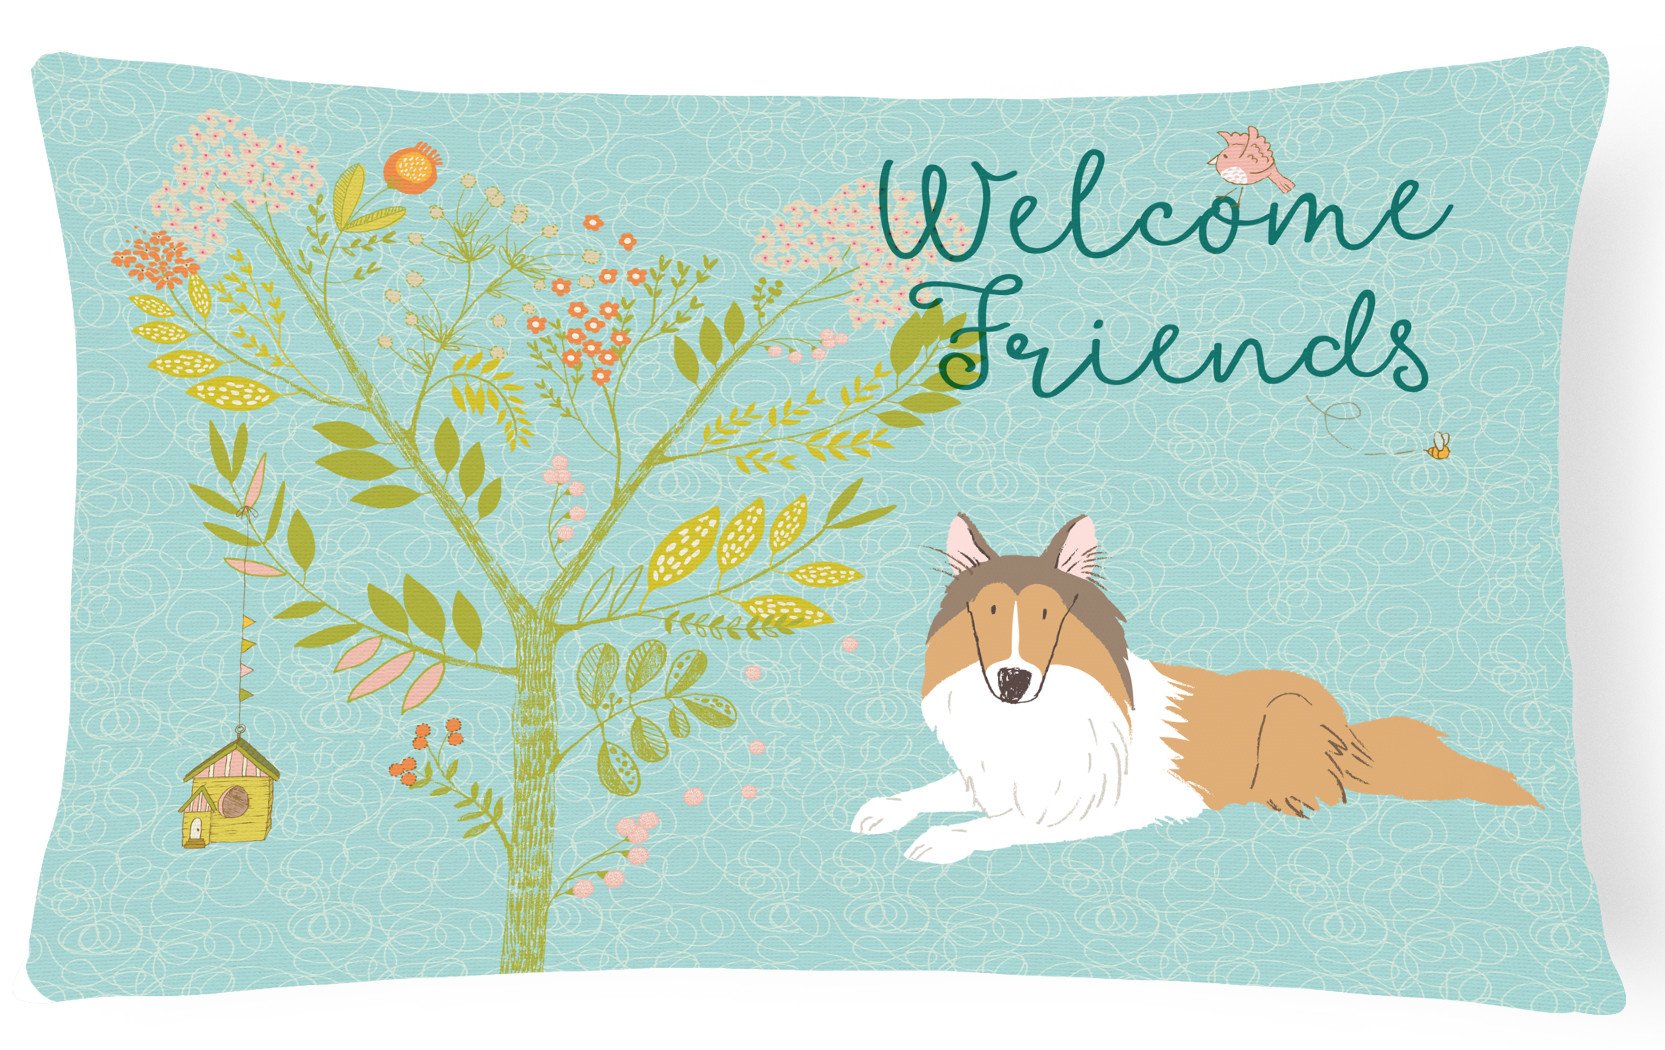 Welcome Friends Collie Canvas Fabric Decorative Pillow BB7584PW1216 by Caroline's Treasures